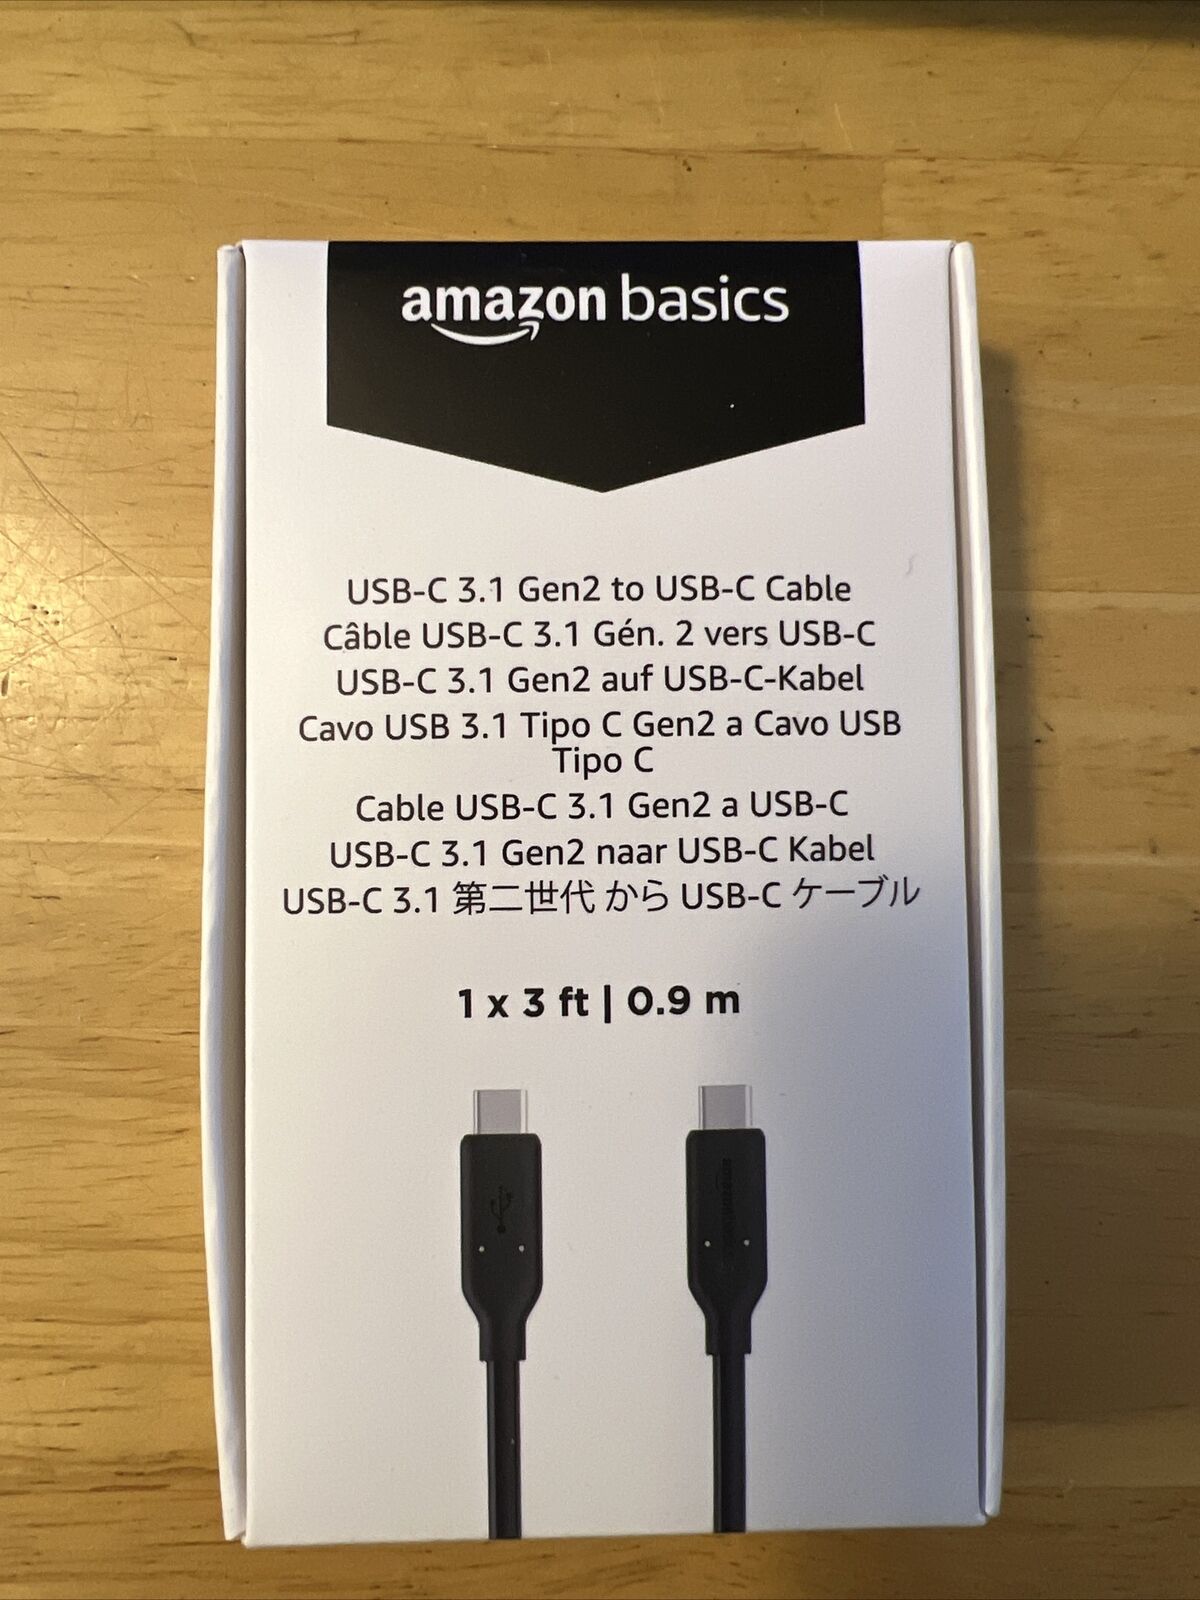 Amazon Basics USB-C 3.1 Gen2 to USB-C Charger Cable - 3-Foot, Black - Sealed